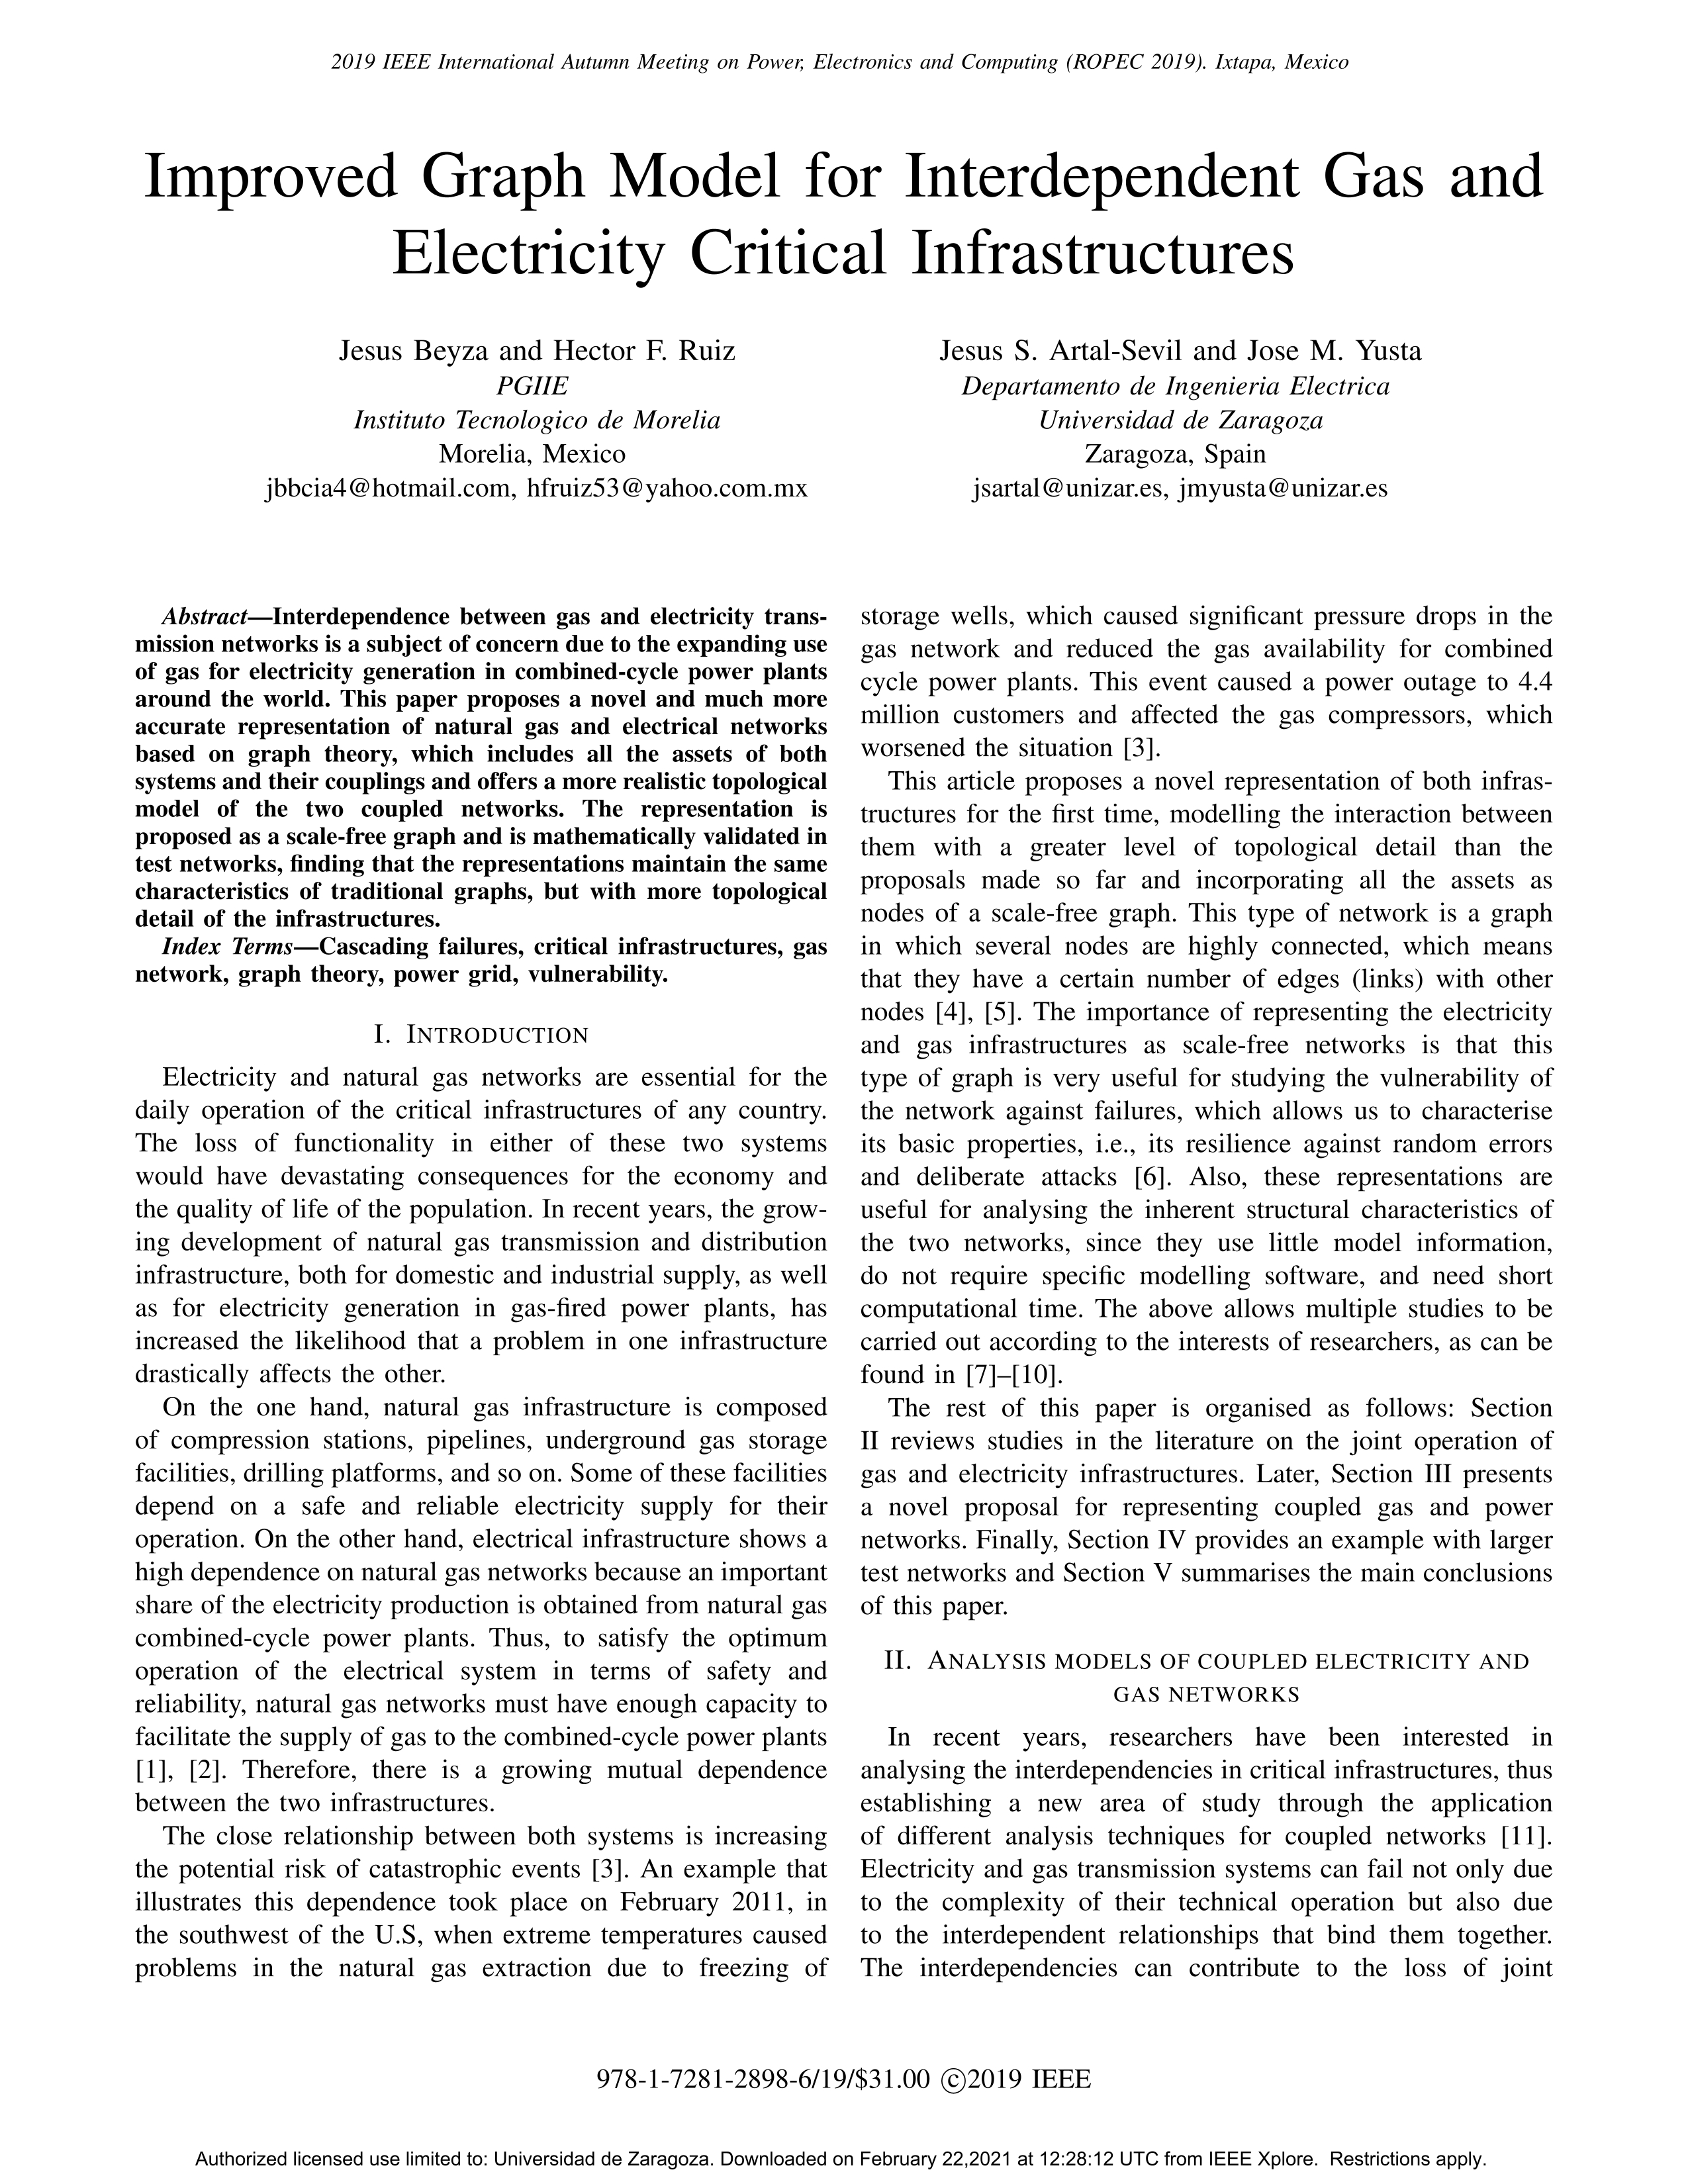 Improved graph model for interdependent gas and electricity critical infrastructures